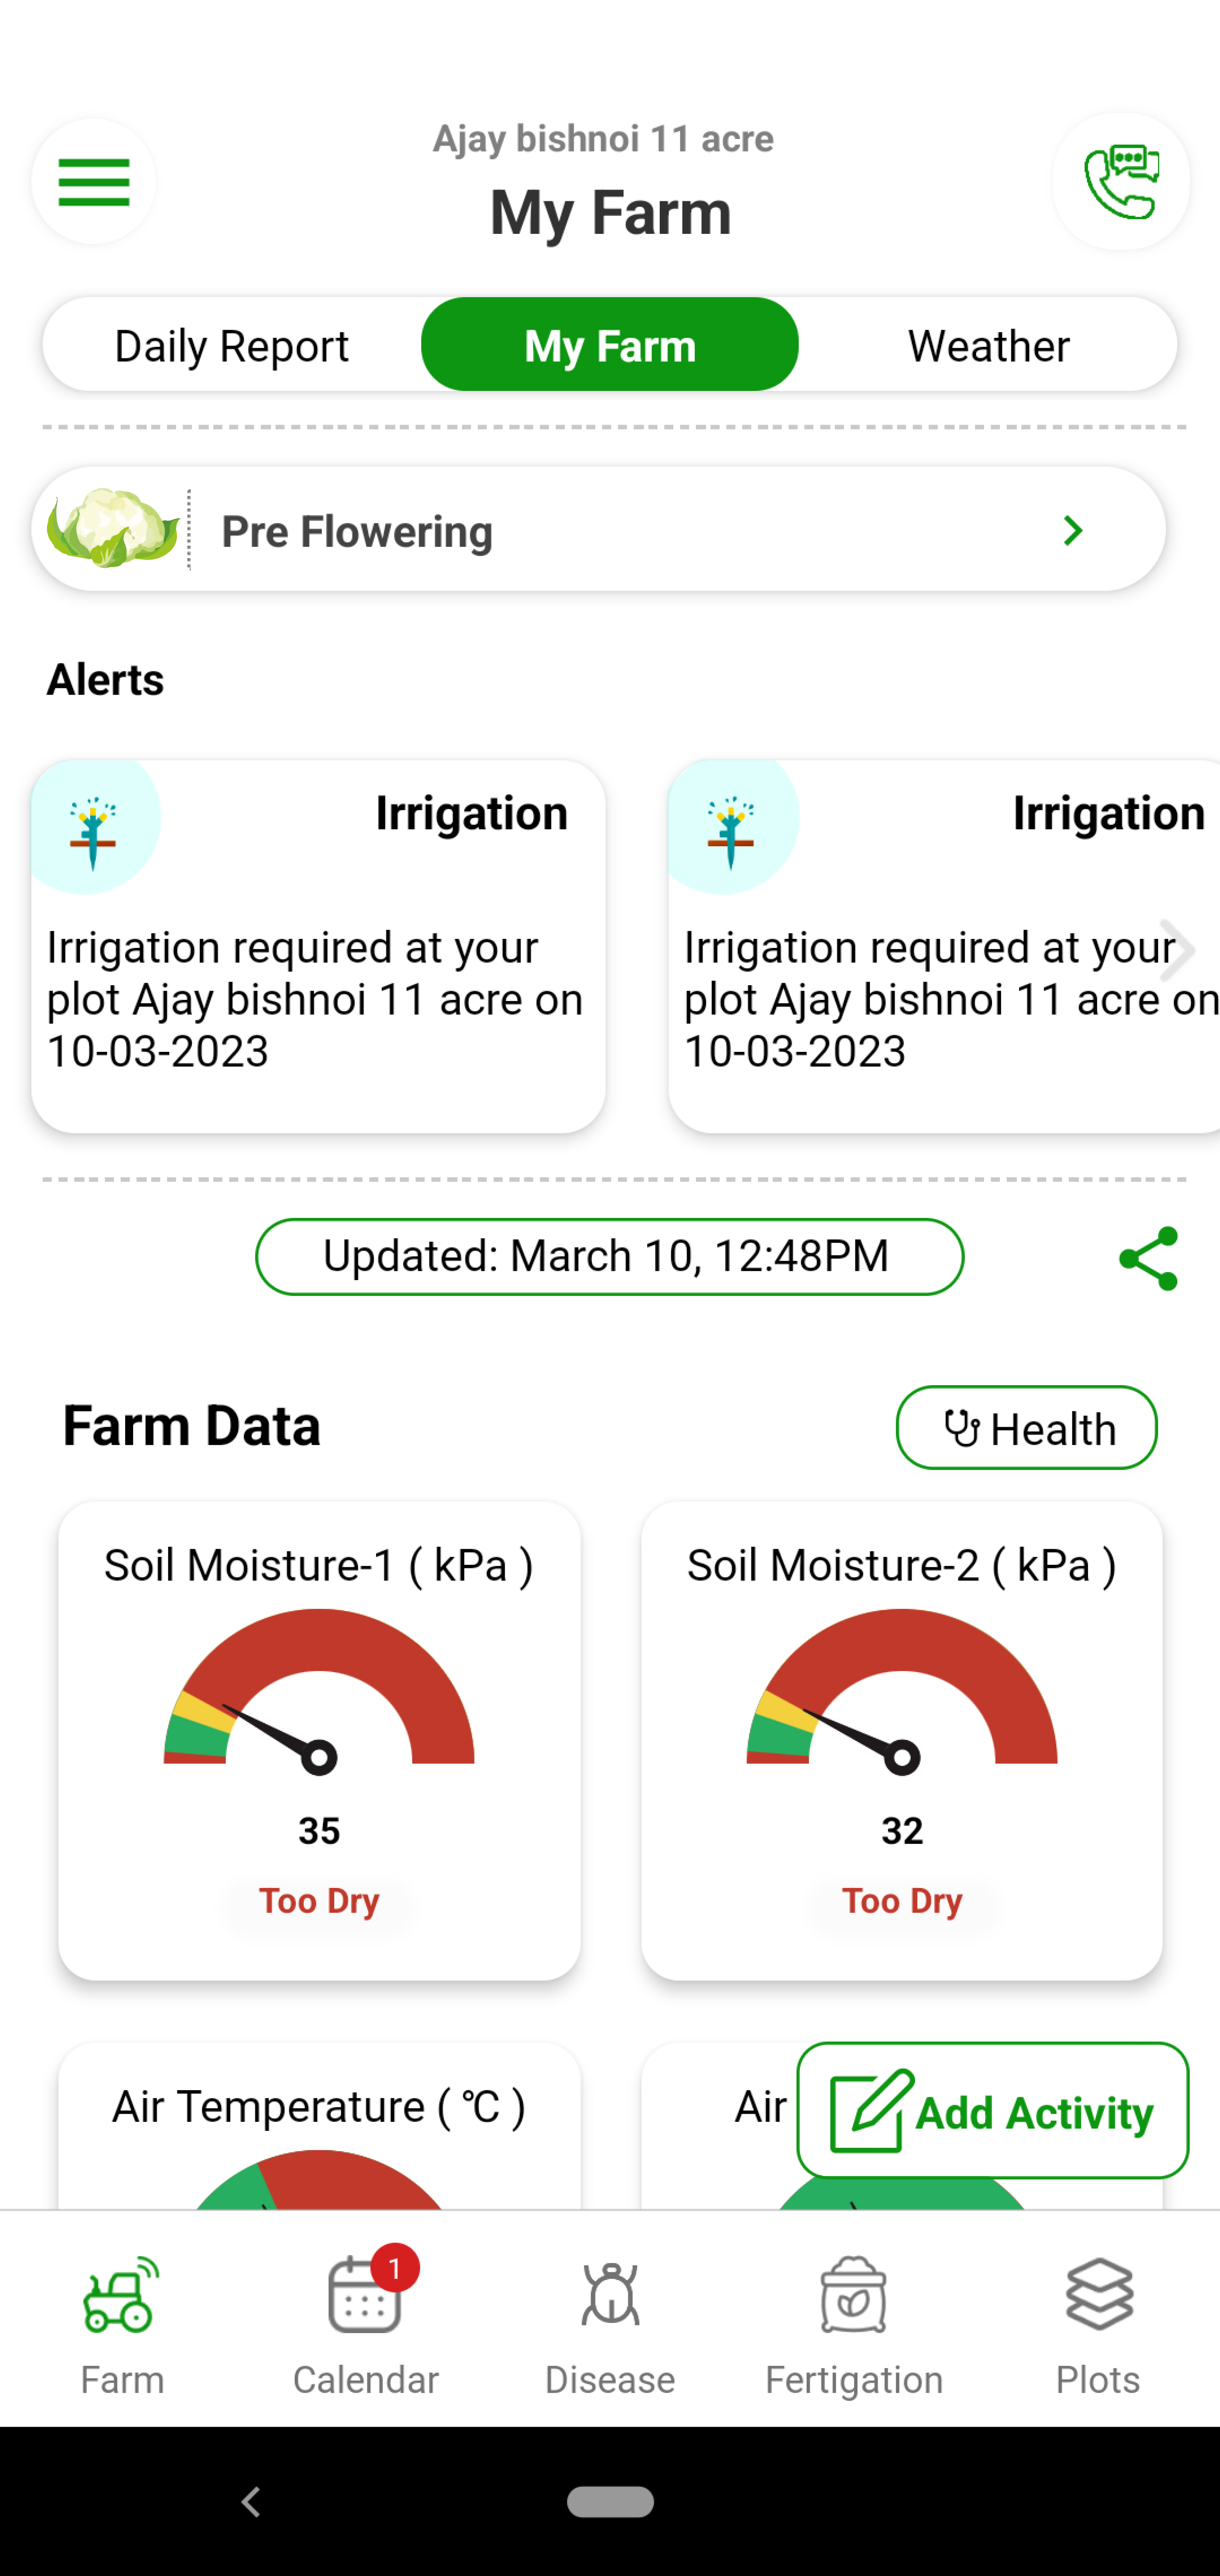 Too much water or too less water can be very harmful for Crucifers. Over irrigation leads to wilting in the plants. Under irrigation leads to poor fruits and yield. Crucifers’s water requirements vary based on soil type and stage. With Fyllo’s device containing soil moisture and soil temperature sensor and intelligent software, you get alerts on how much water to provide to the crop. You can also see and visualize evapotranspiration (Etc) values of the crop. You can perfectly manage the water requirements to get the perfect size, color.